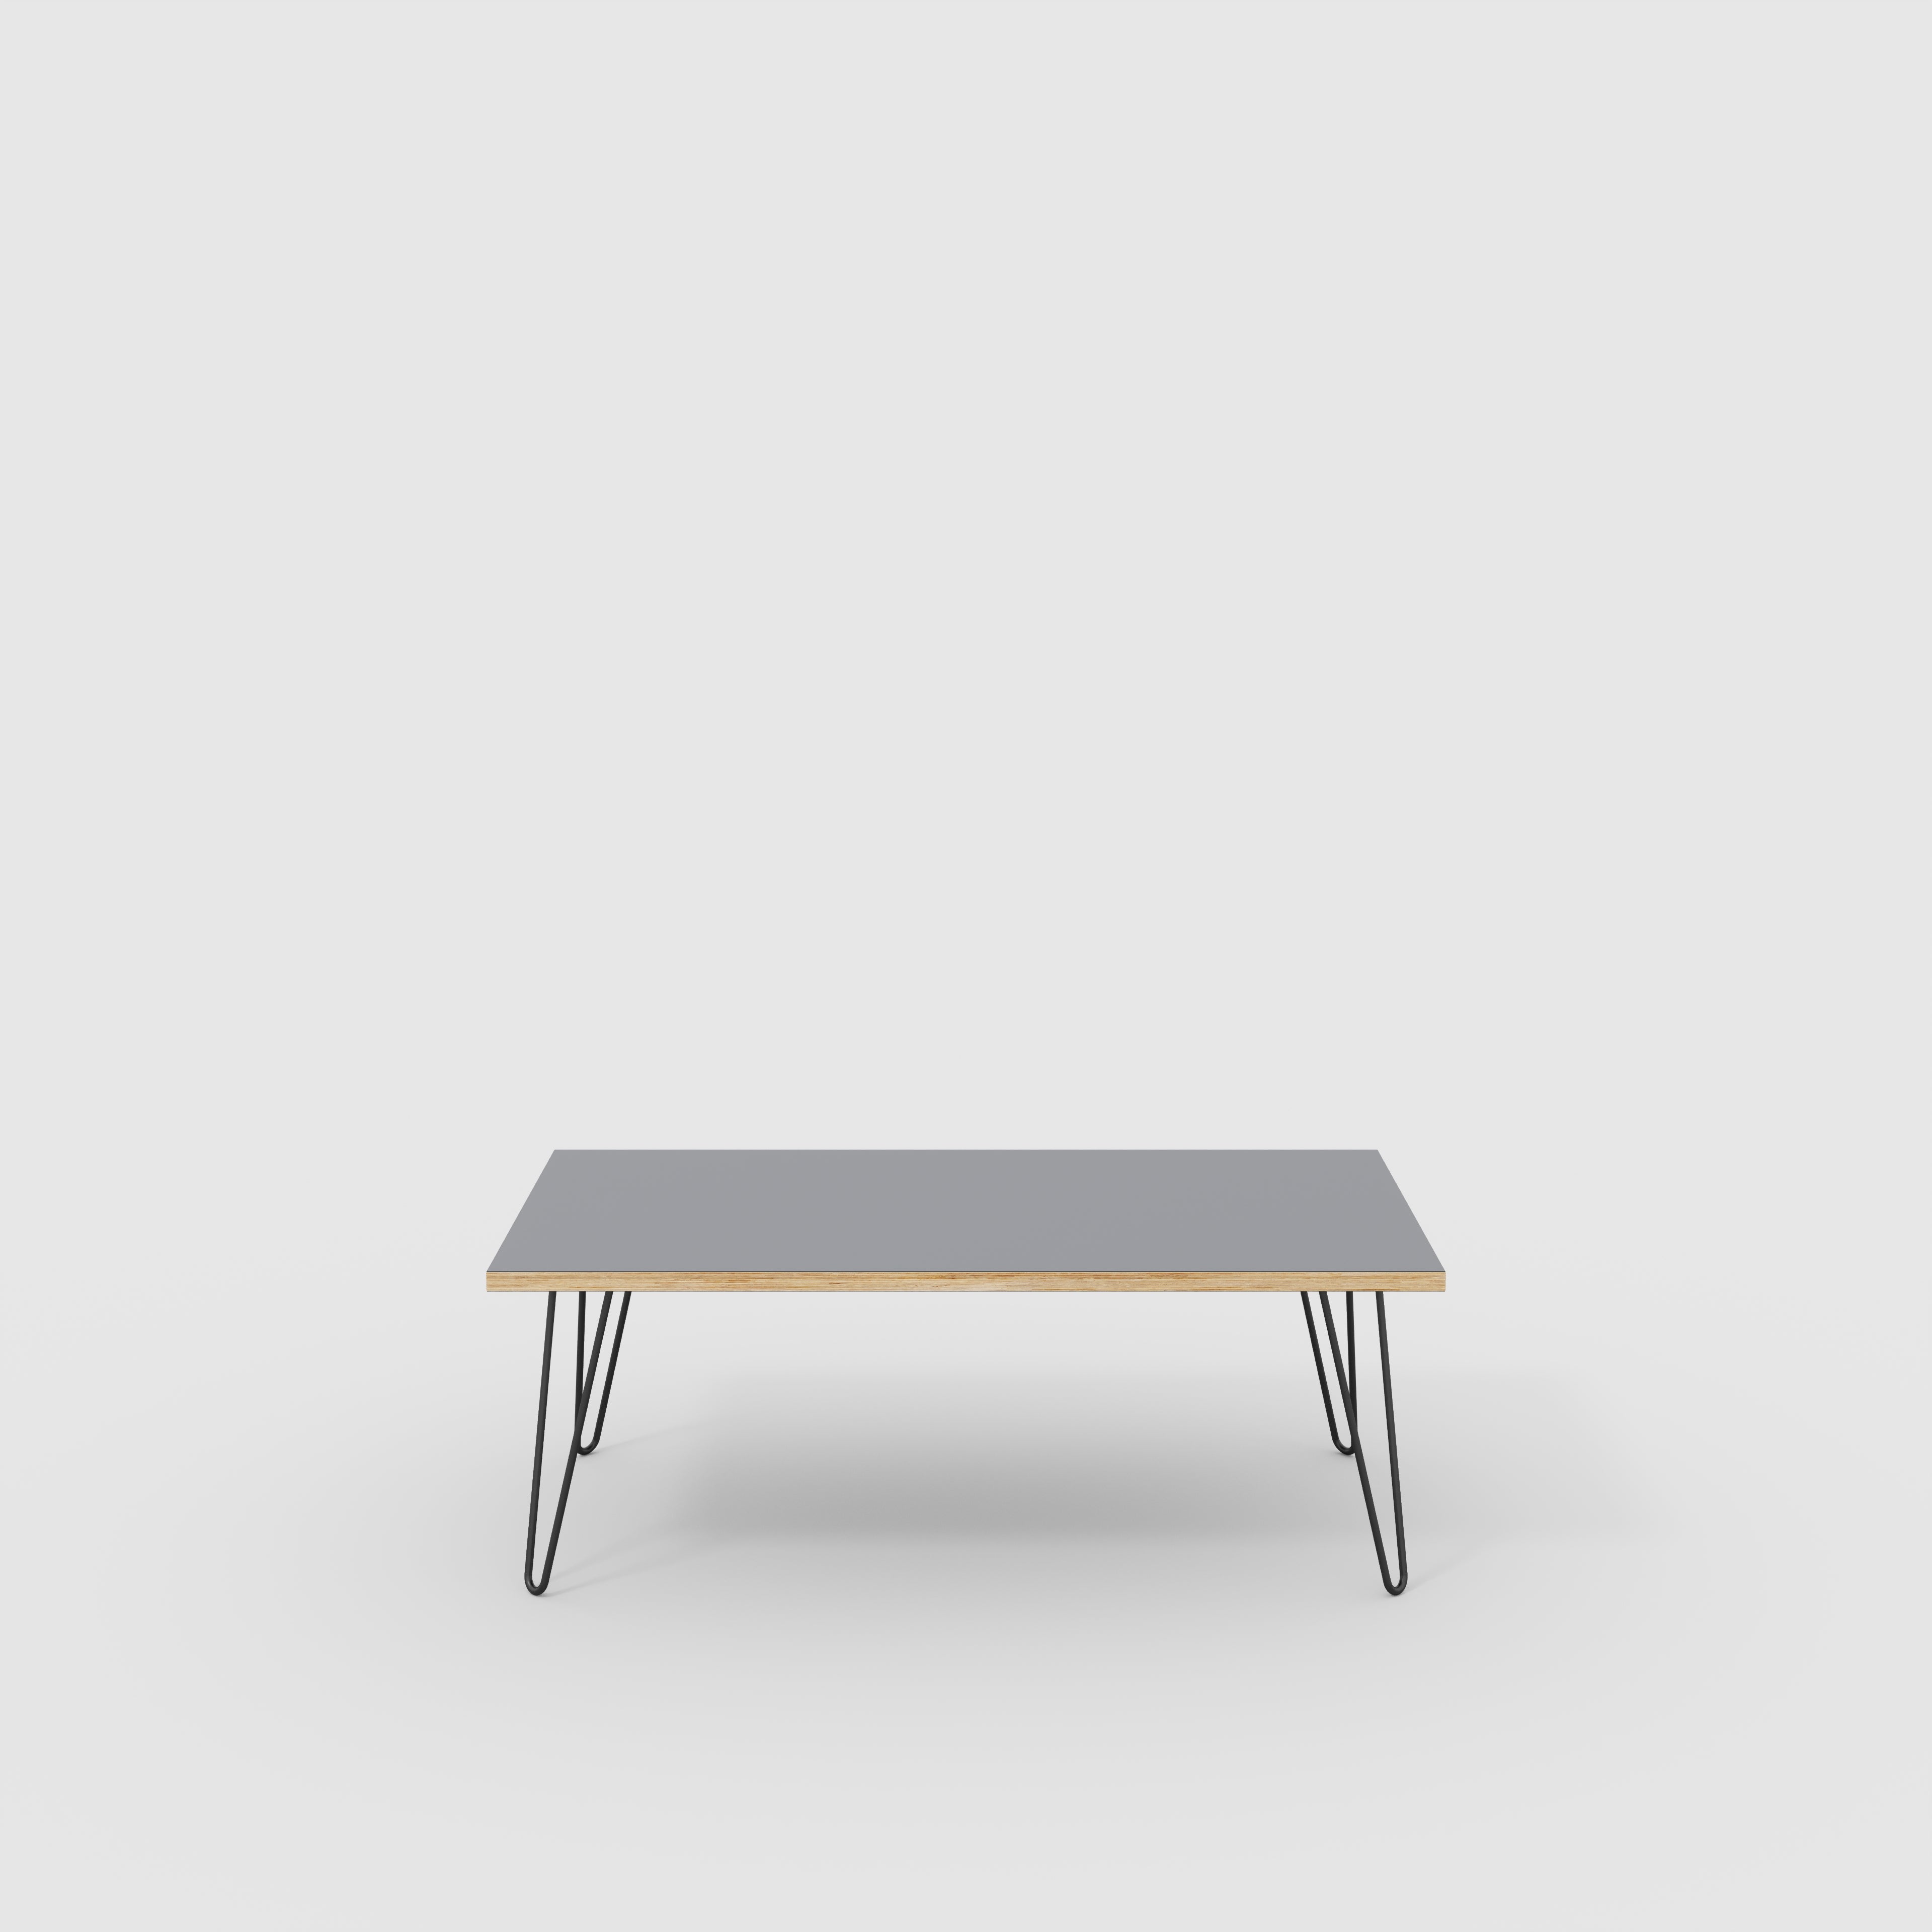 Coffee Table with Black Hairpin Legs - Formica Tornado Grey - 1200(w) x 600(d) x 425(h)